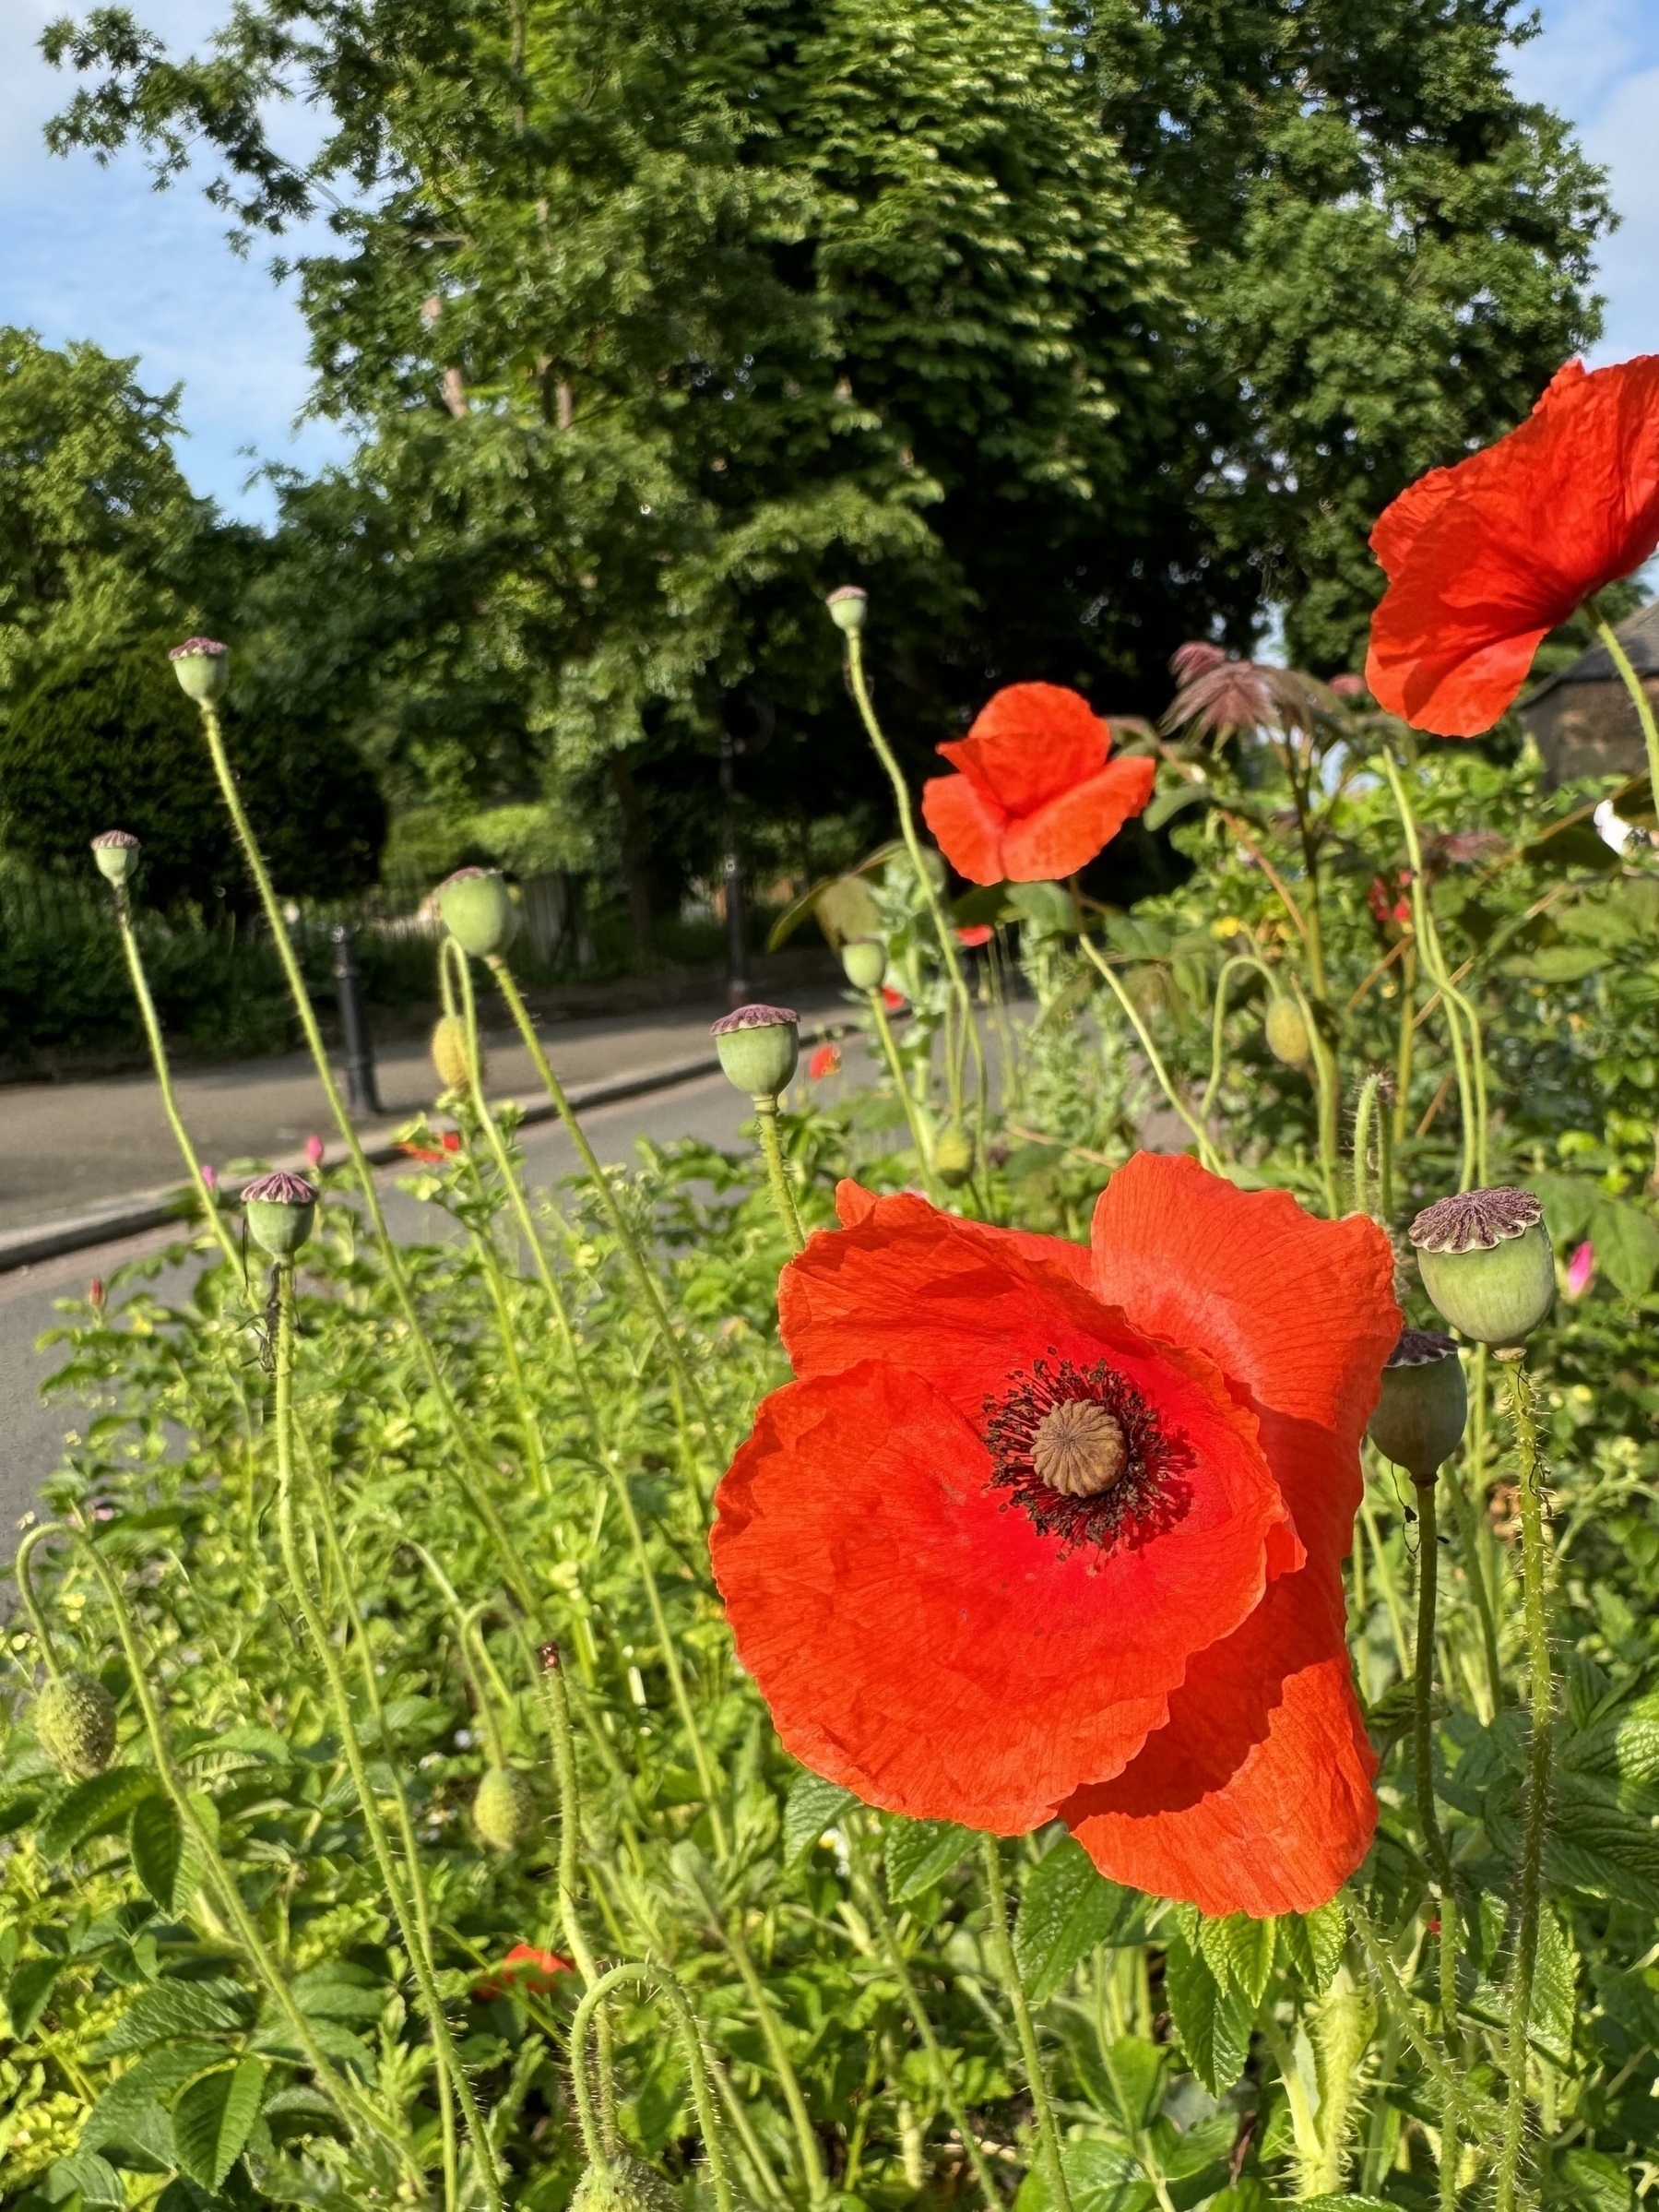 A red poppy with a road in the background.